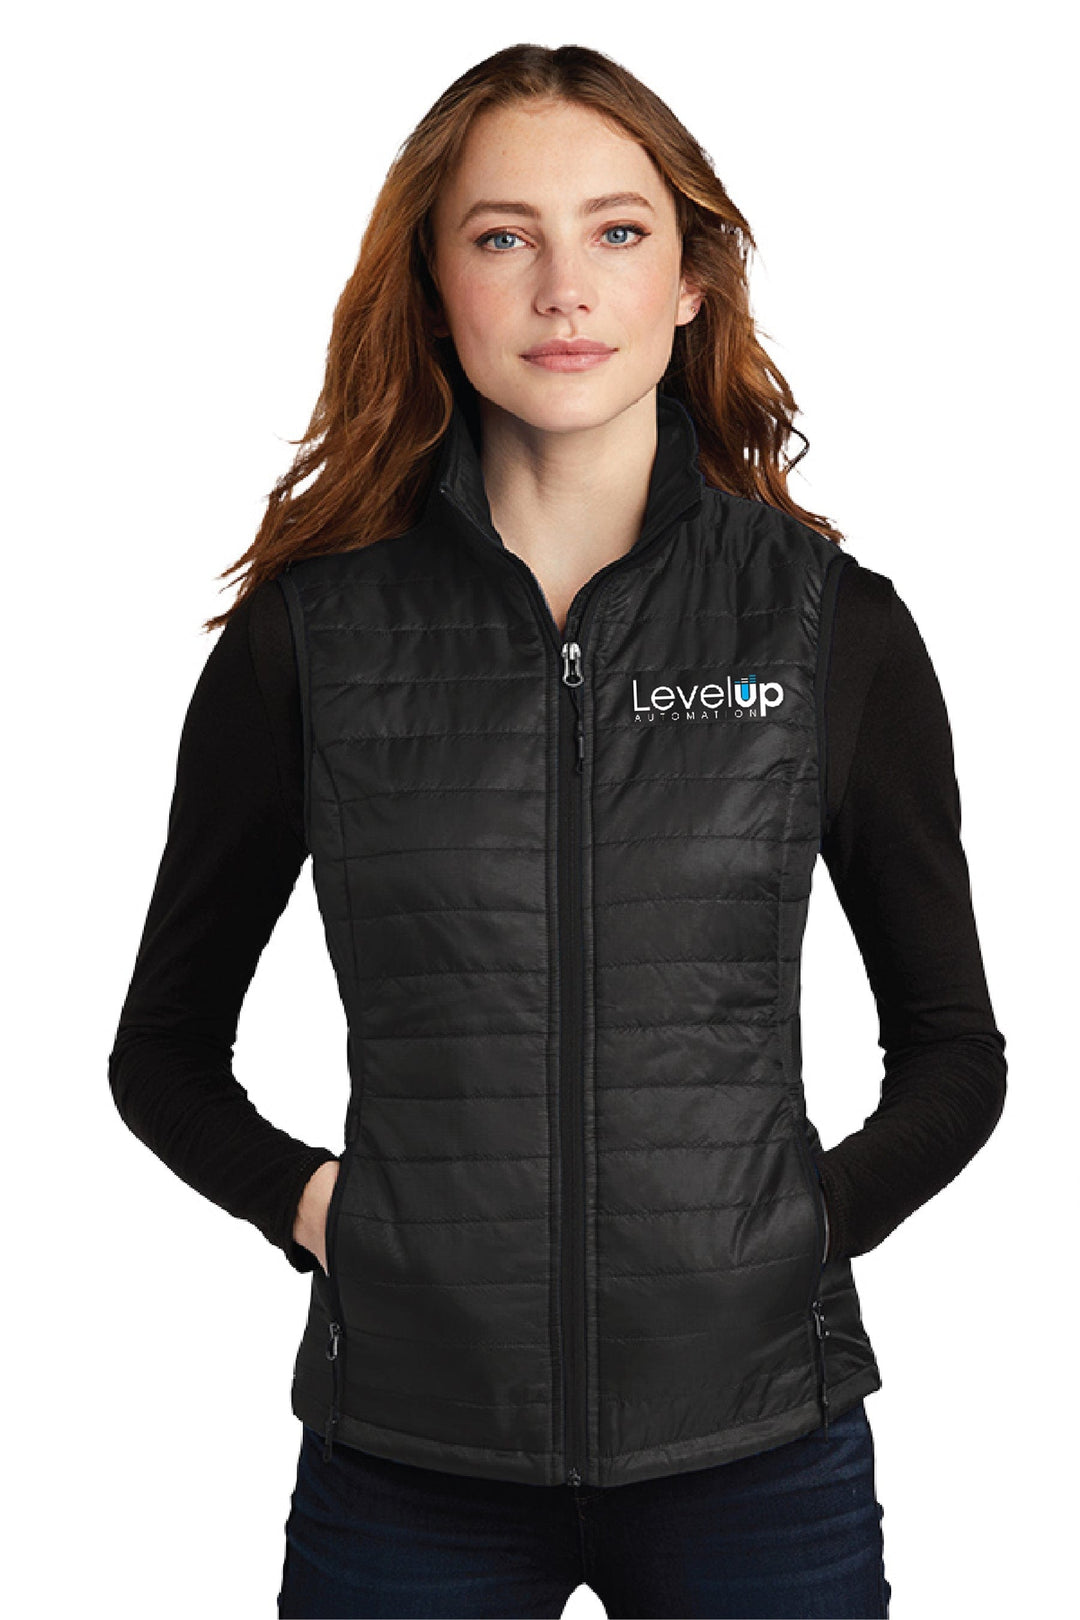 Level Up Automation Apparel & Accessories Women's Puffy Vest - Black